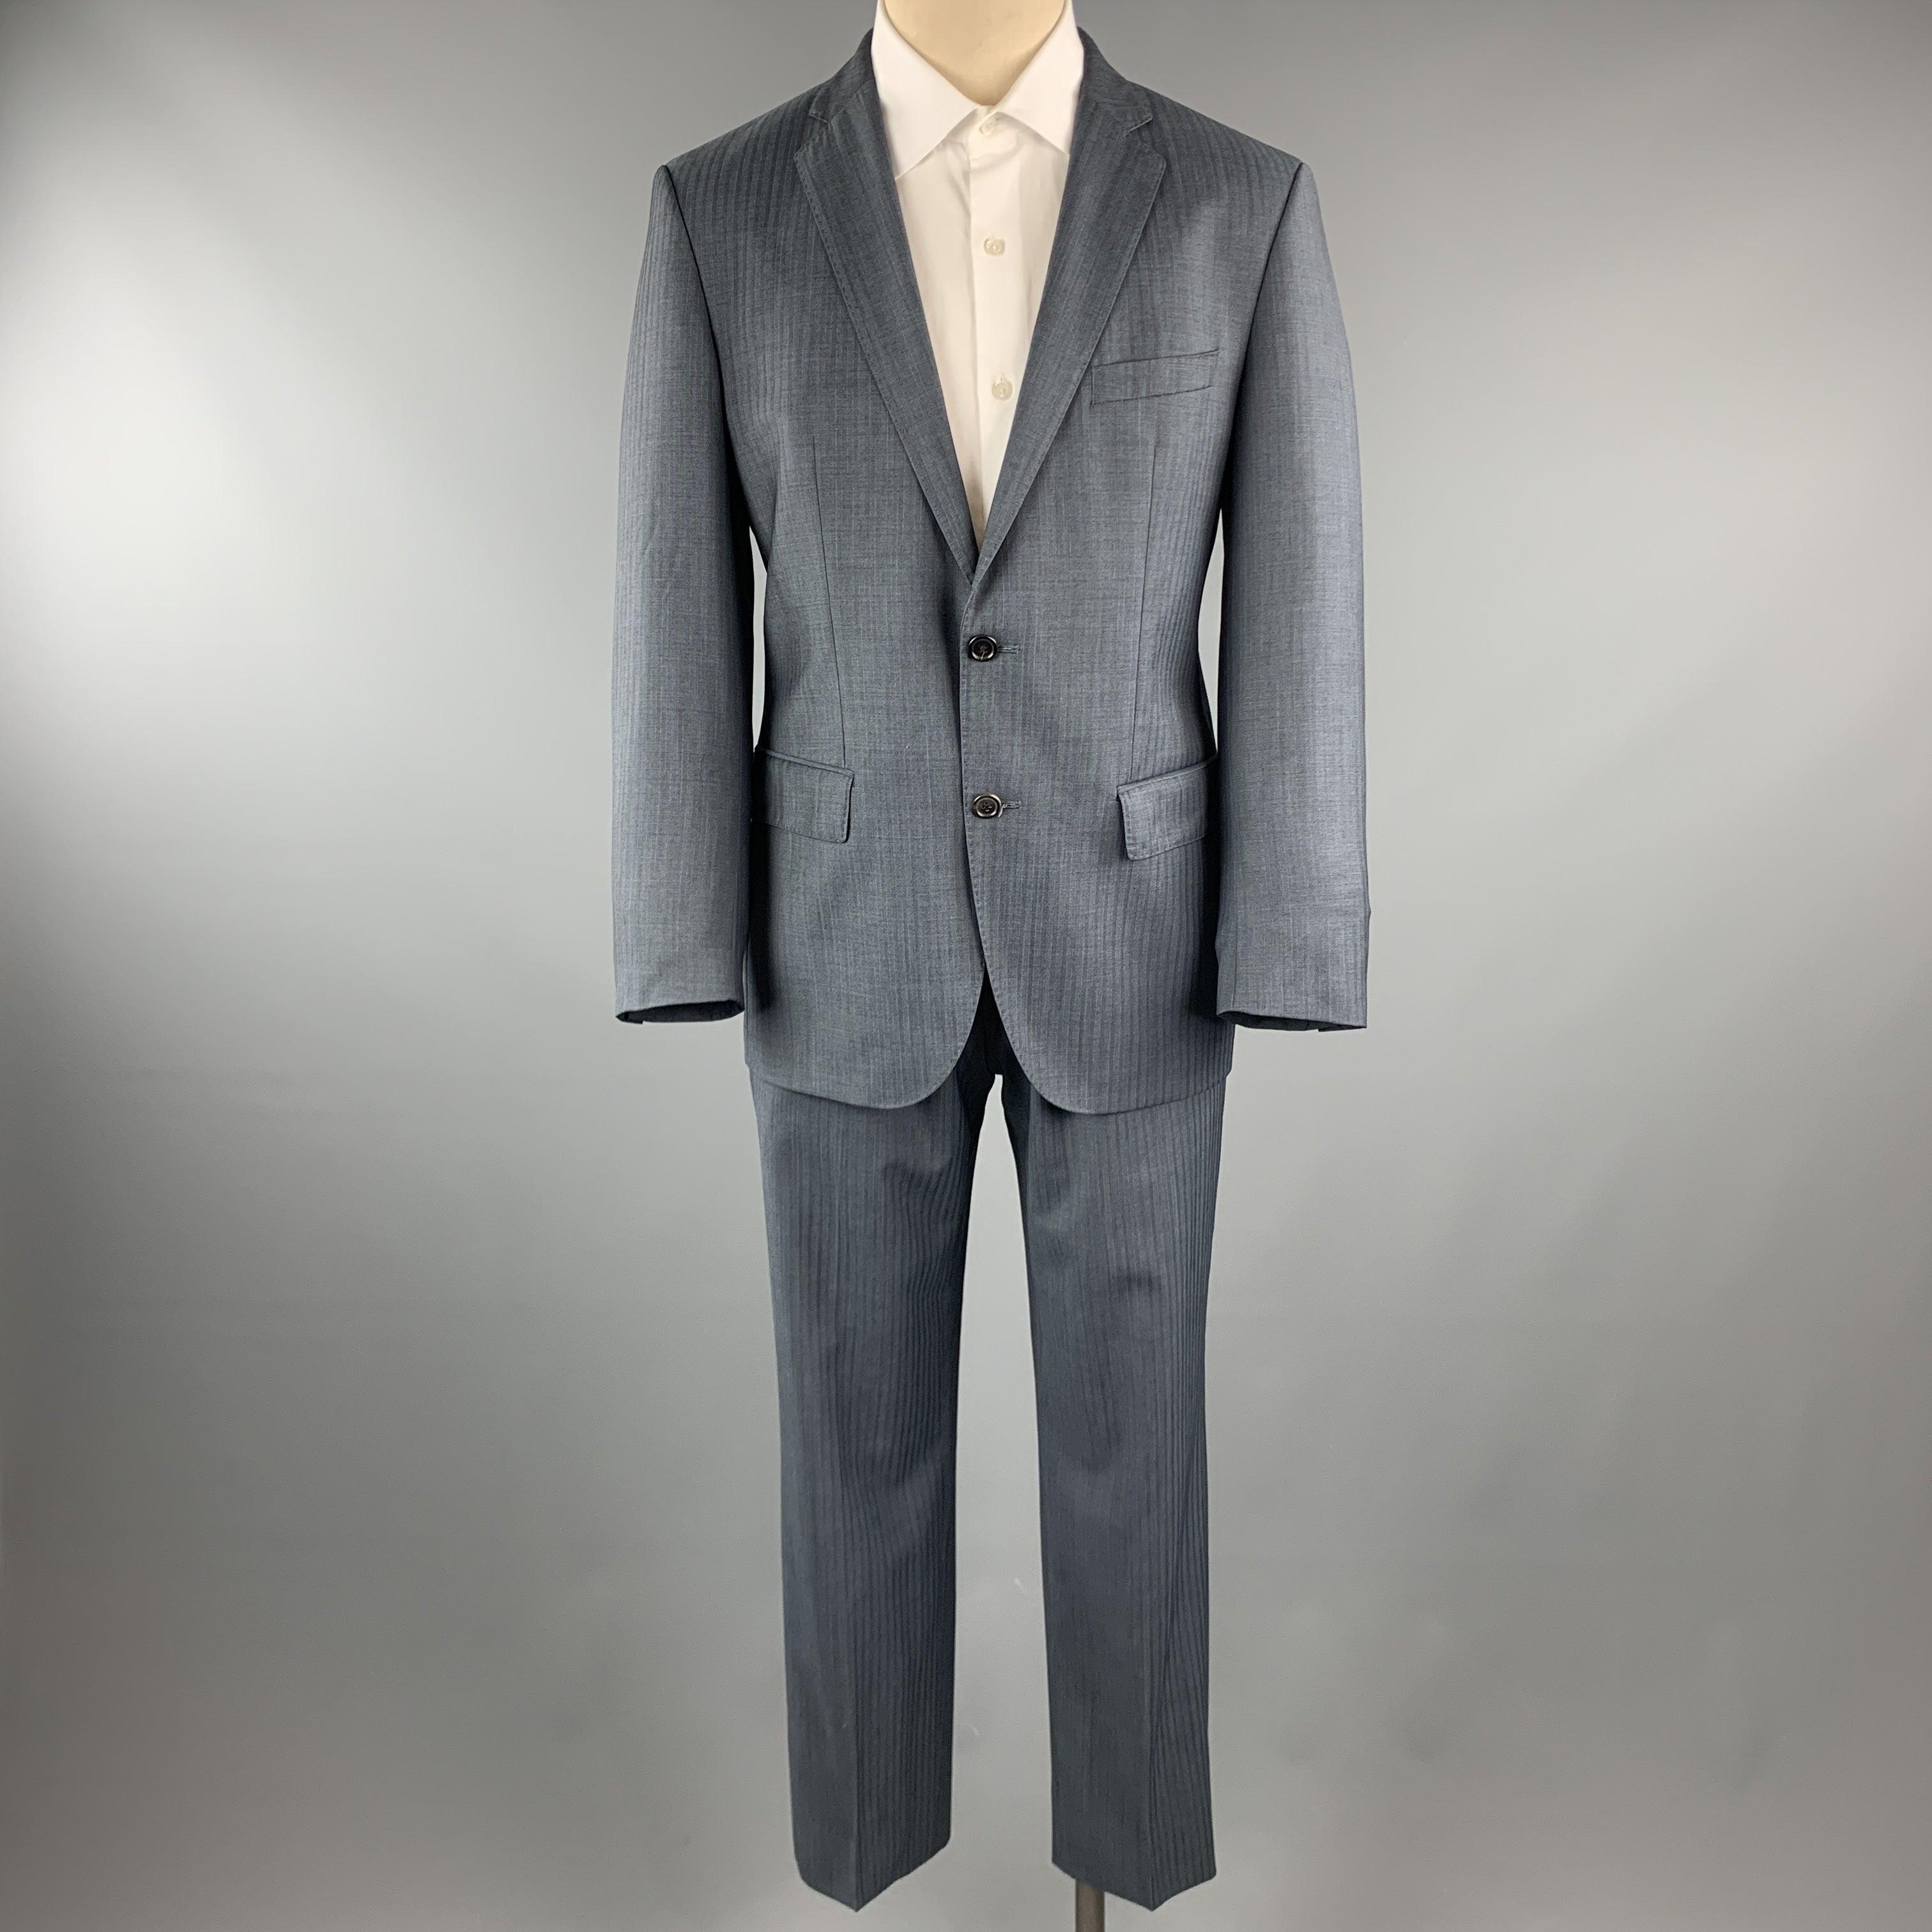 HUGO BOSS
suit comes in a blue stripe lana wool and includes a single breasted, two button sport coat with a notch lapel and matching front trousers.
Excellent Pre-Owned Condition. 

Marked:   38 

Measurements: 
  -JacketShoulder: 16.5 inches